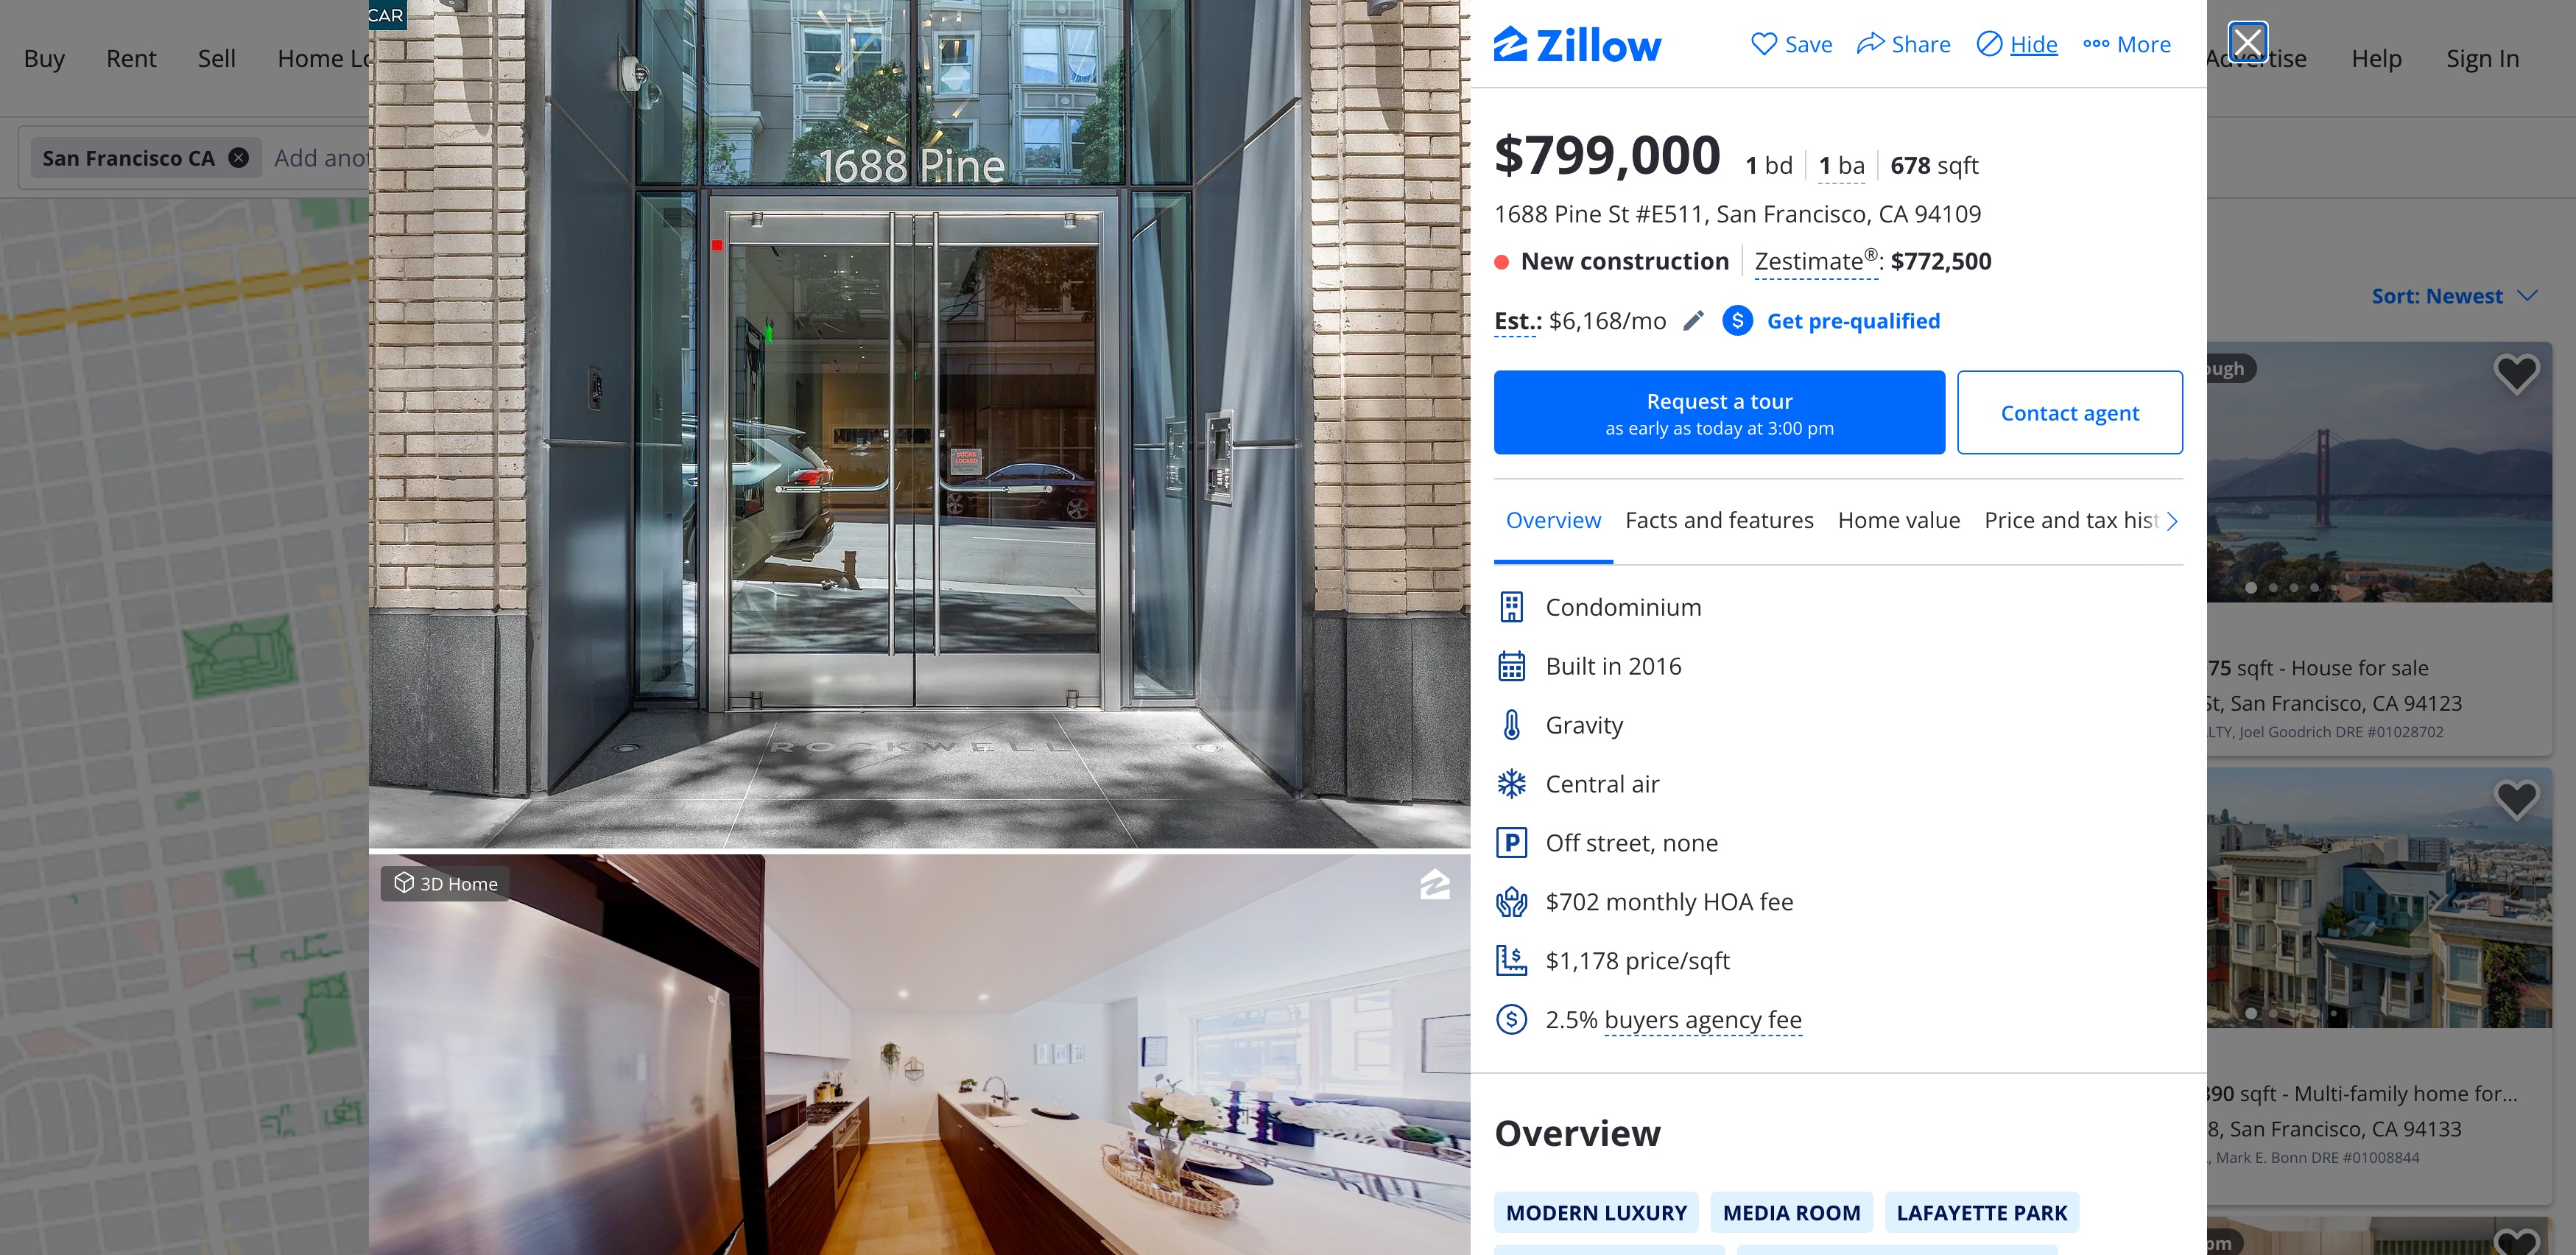 A screenshot Thursday shows a Zillow real-estate listing for a condominium in San Francisco's Pacific Heights neighborhood.